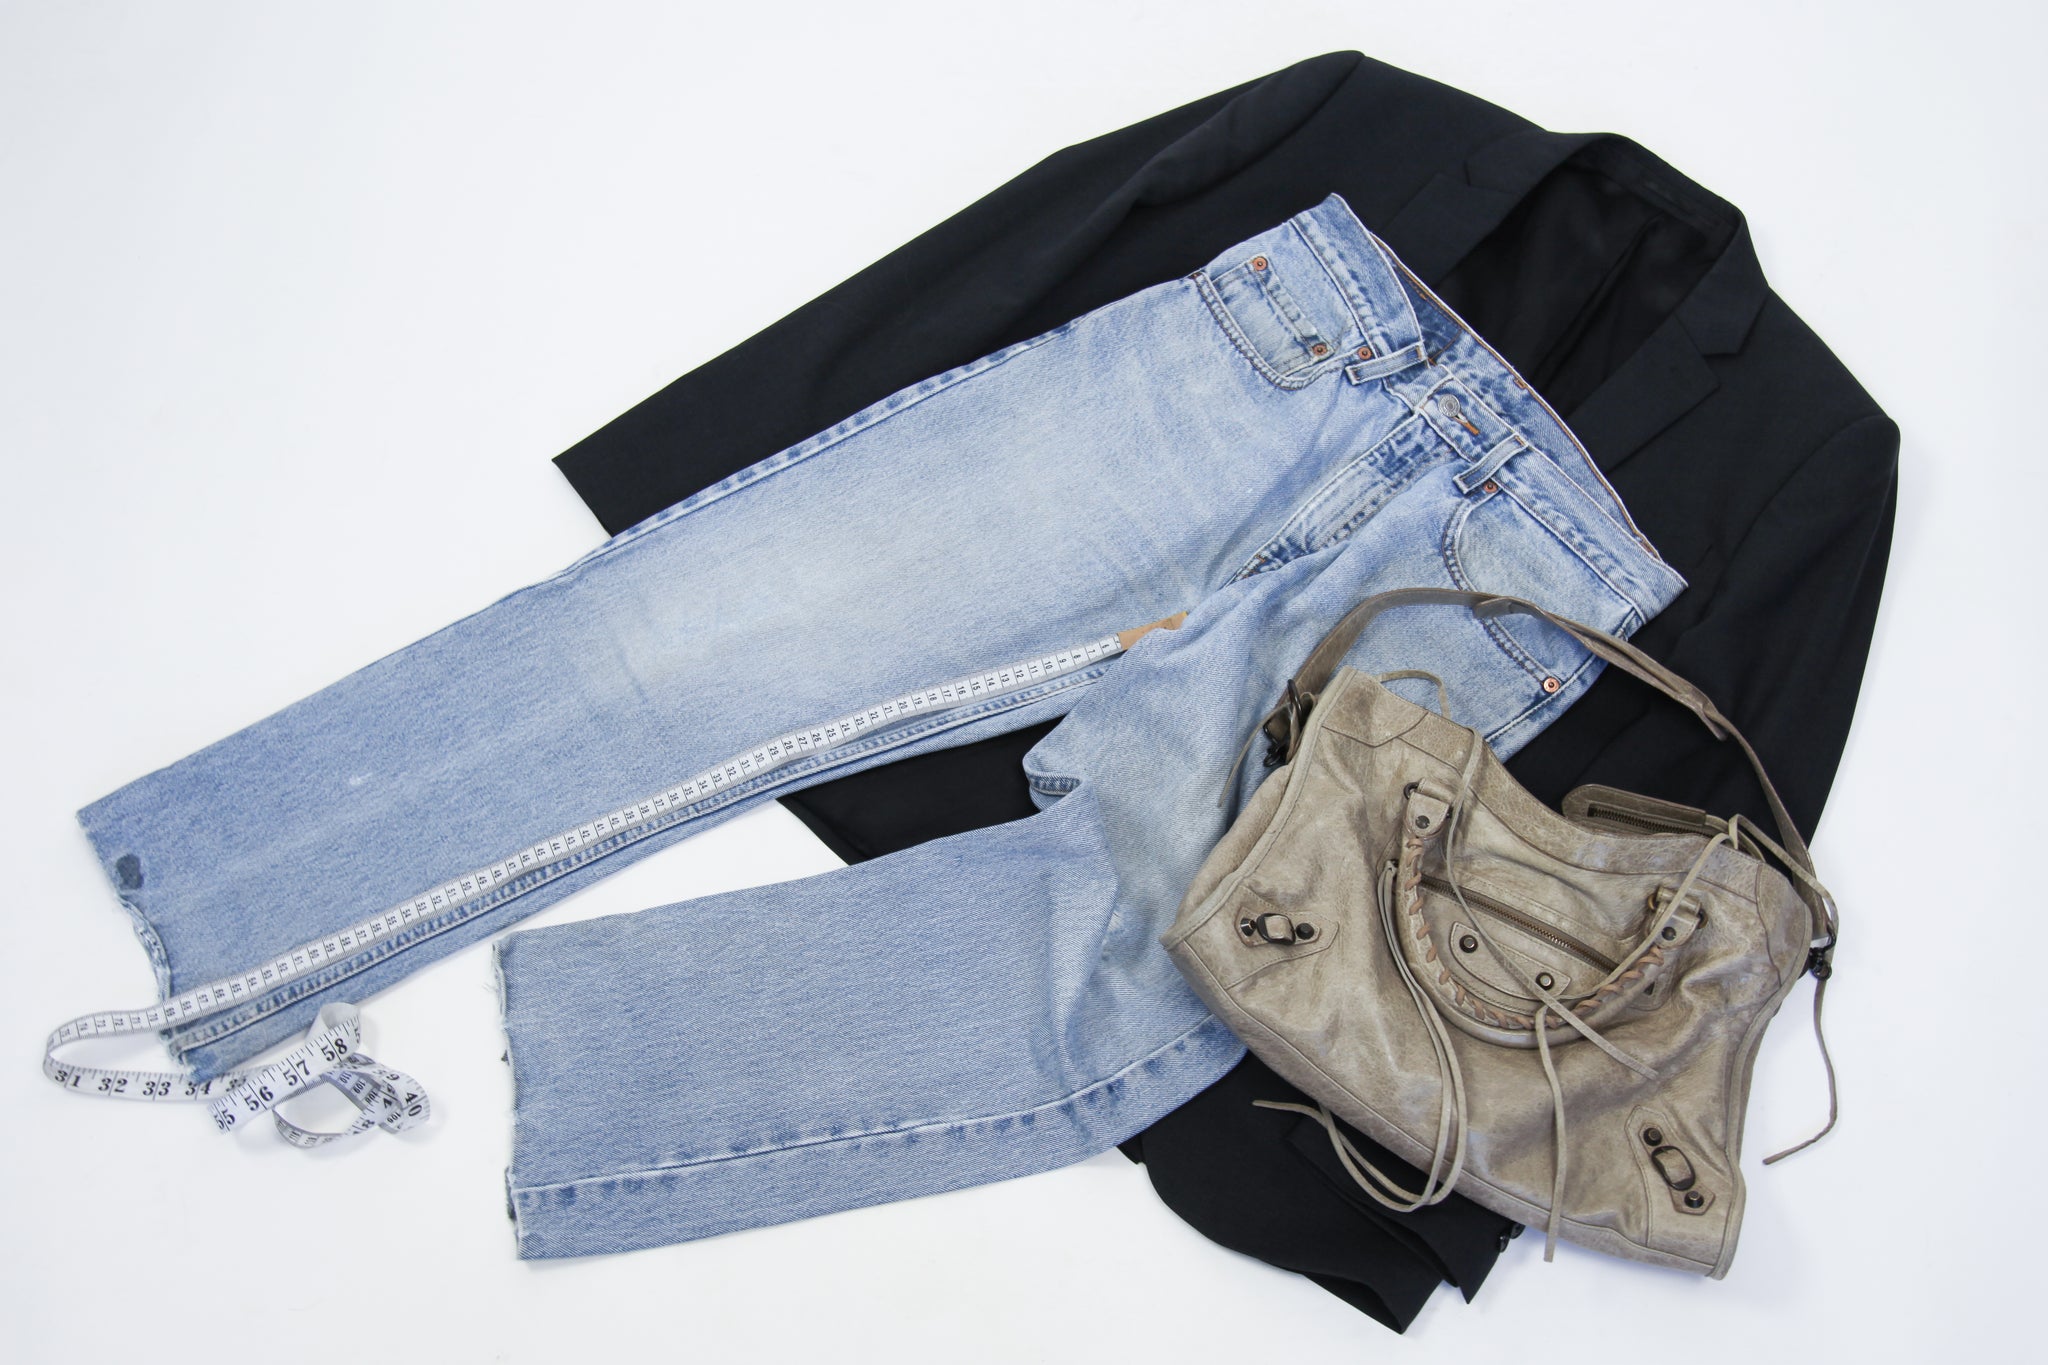 Flat lay of blazer, bag and jeans with measuring tape on inside leg